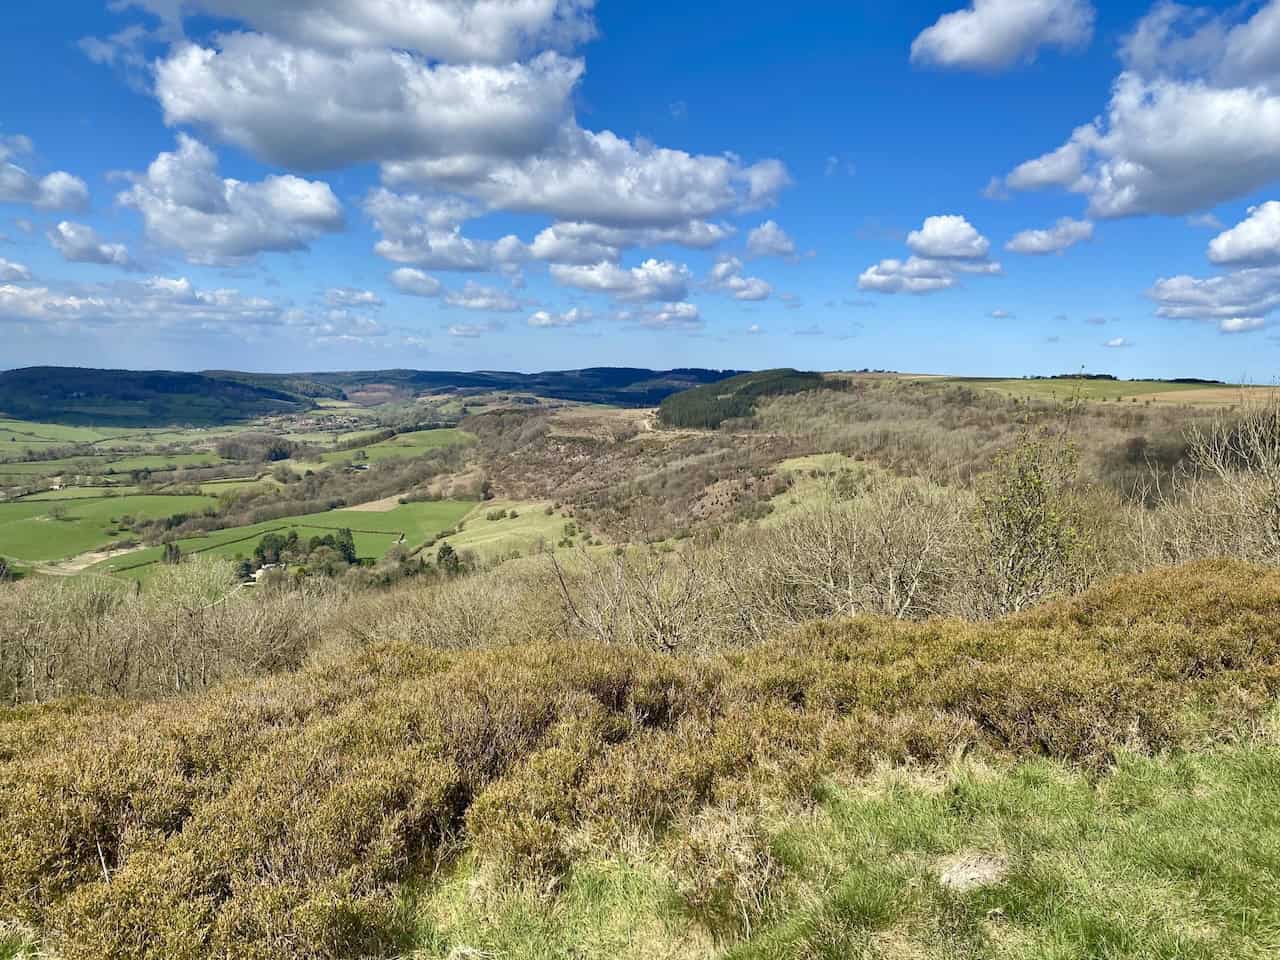 Looking north over Boltby Forest from the top of Whitestone Cliff, presenting a breathtaking panorama.